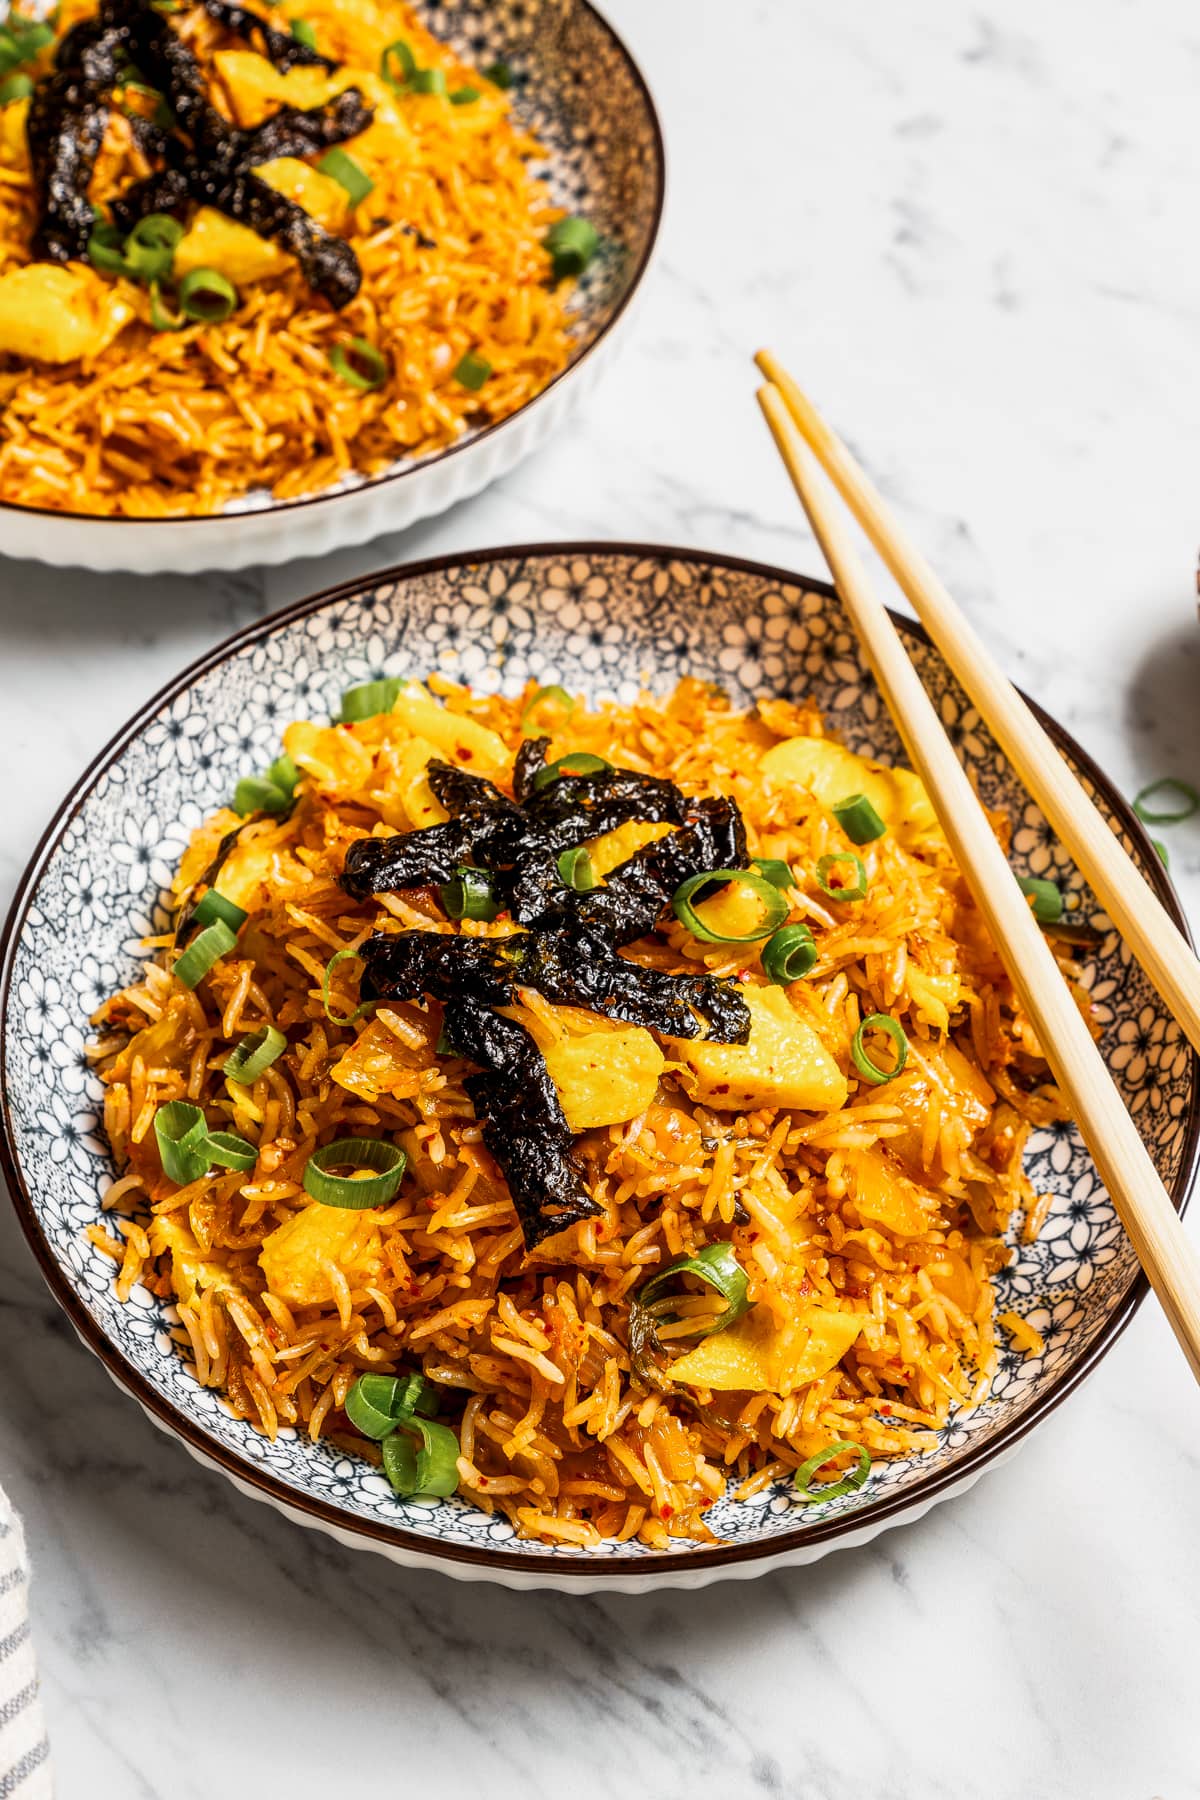 Kimchi fried rice served in a bowl with chopsticks.